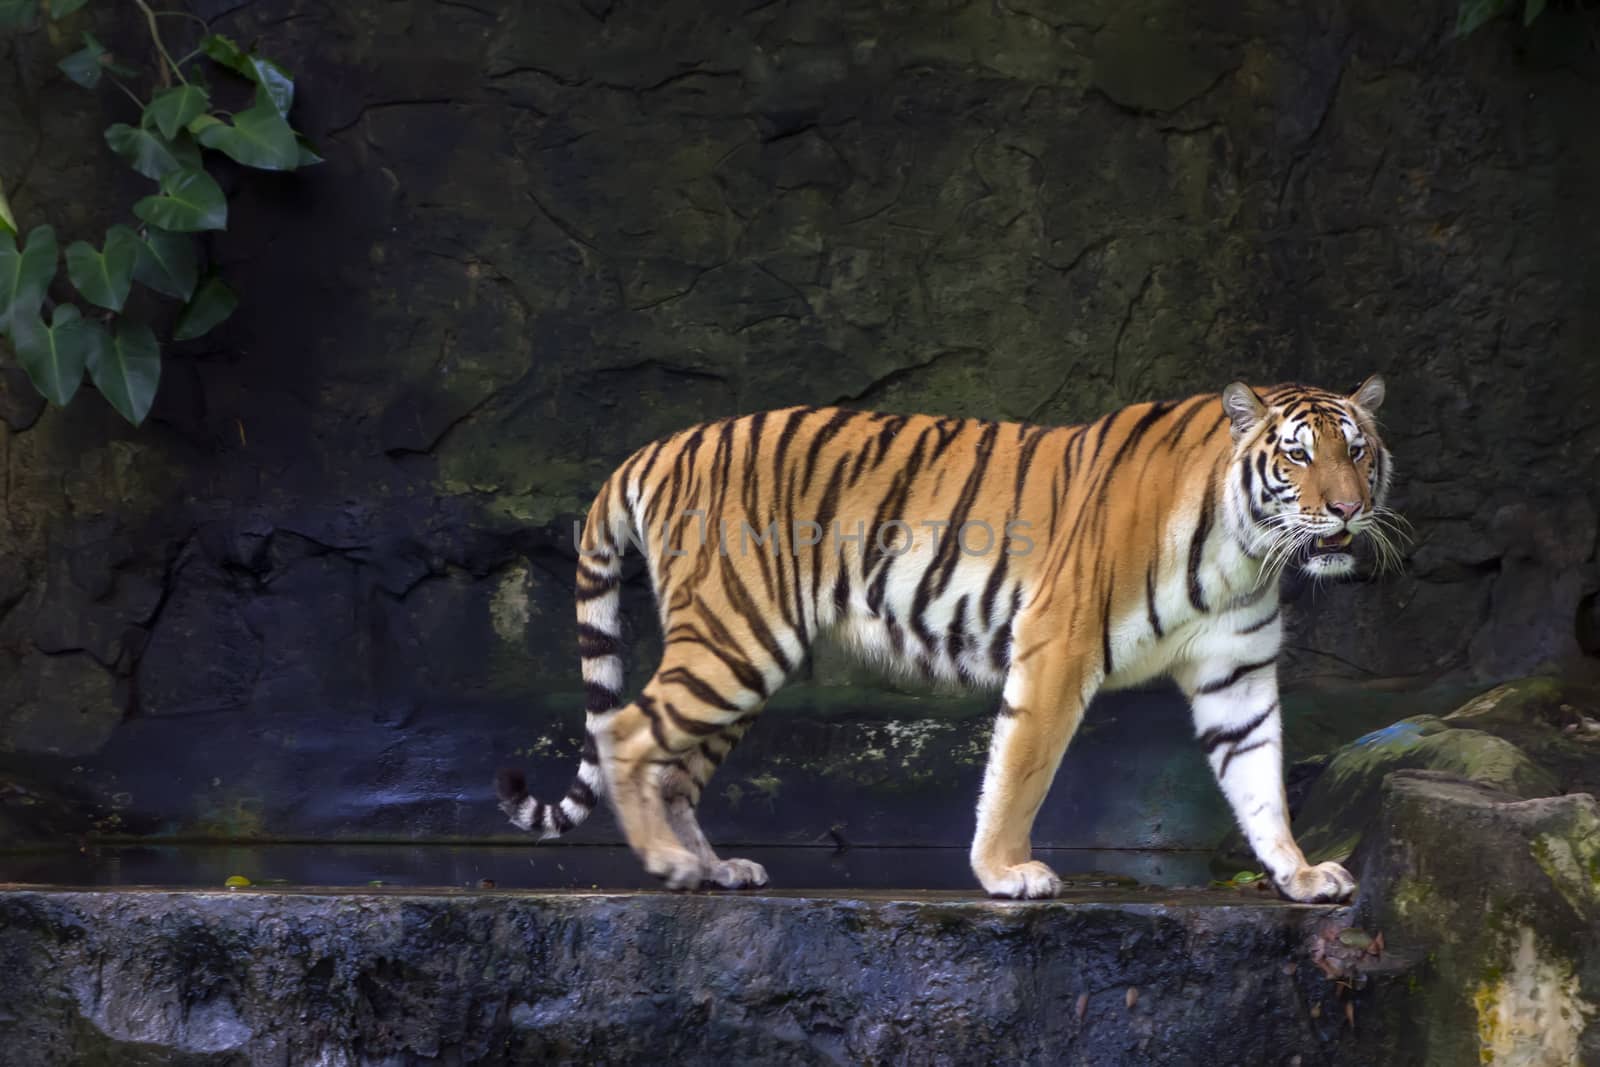 Siberian Tiger (Panthera tigris altaica), also known as the Amur tiger, is the largest tiger subspecies